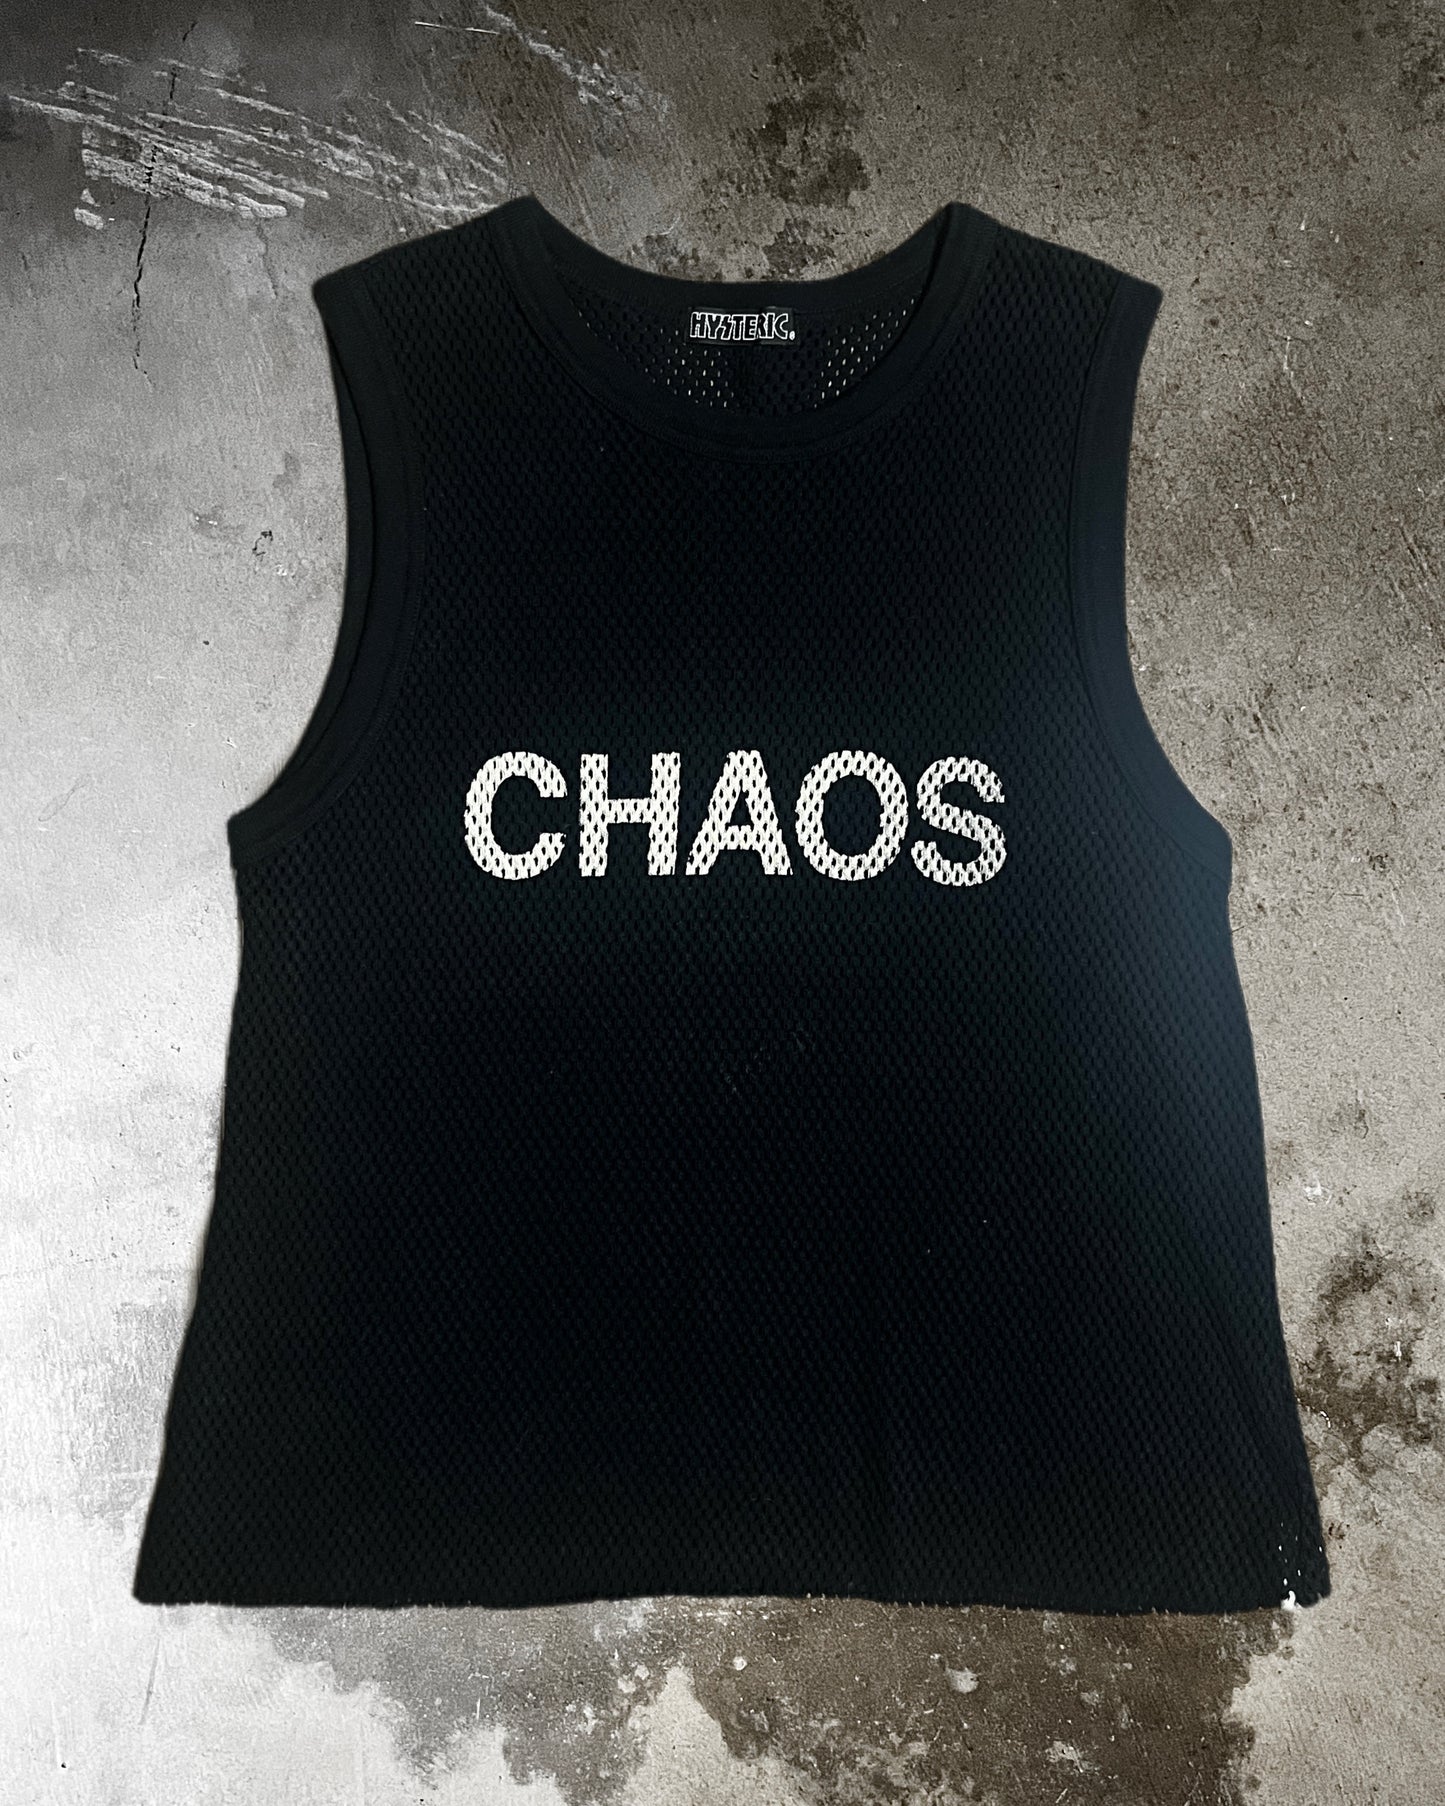 Hysteric Glamour "Chaos Bringer" Mesh Tank